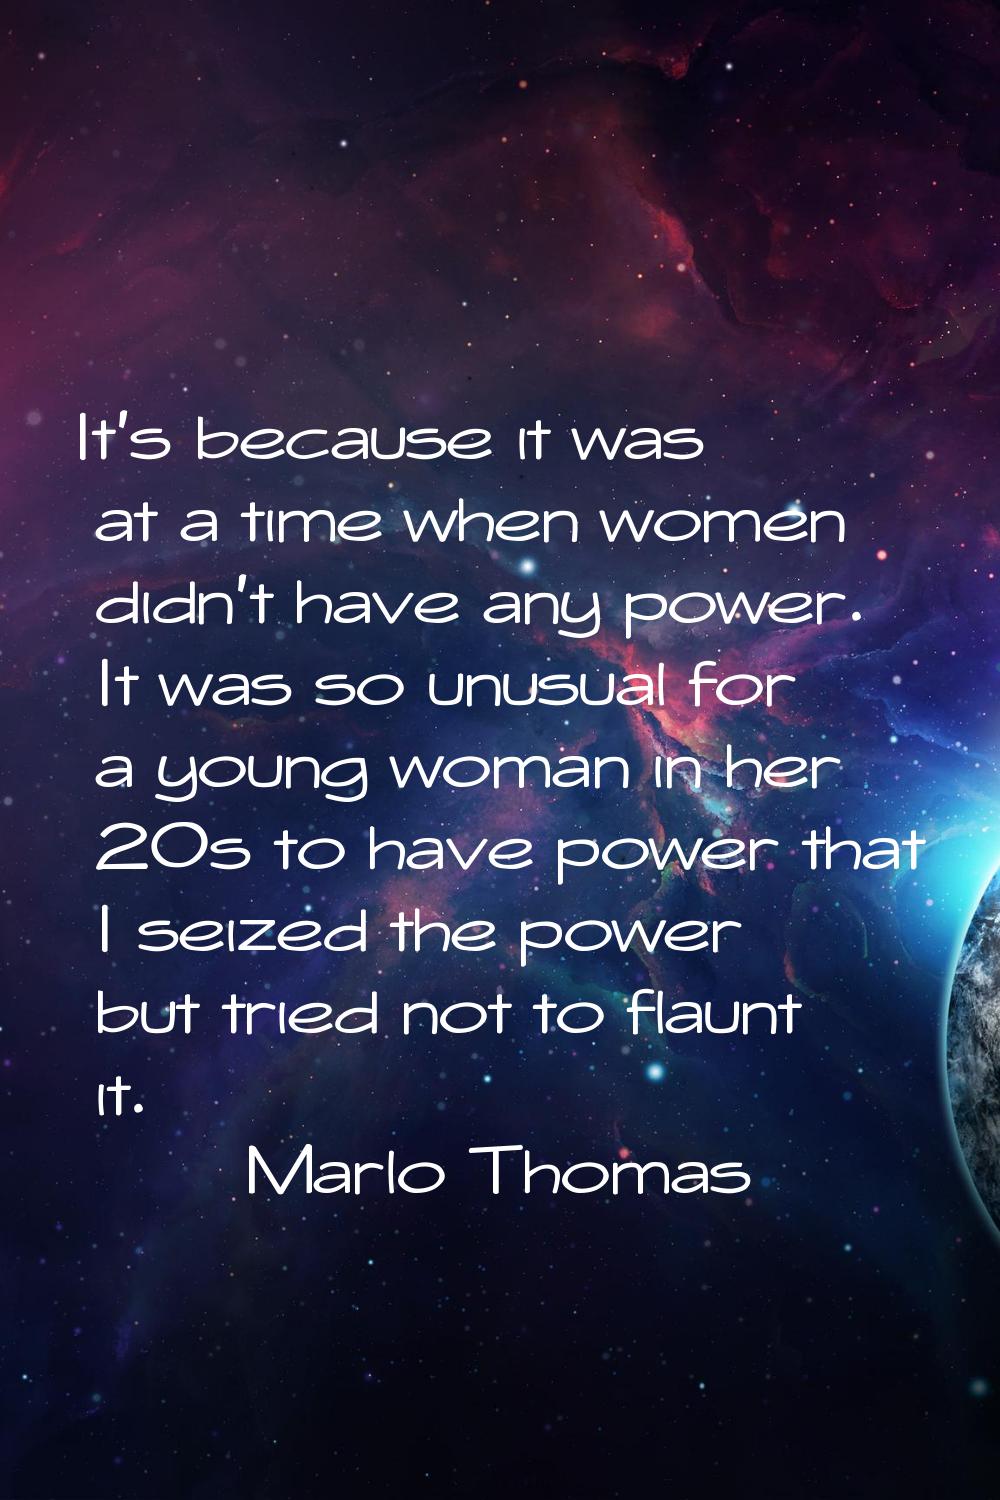 It's because it was at a time when women didn't have any power. It was so unusual for a young woman